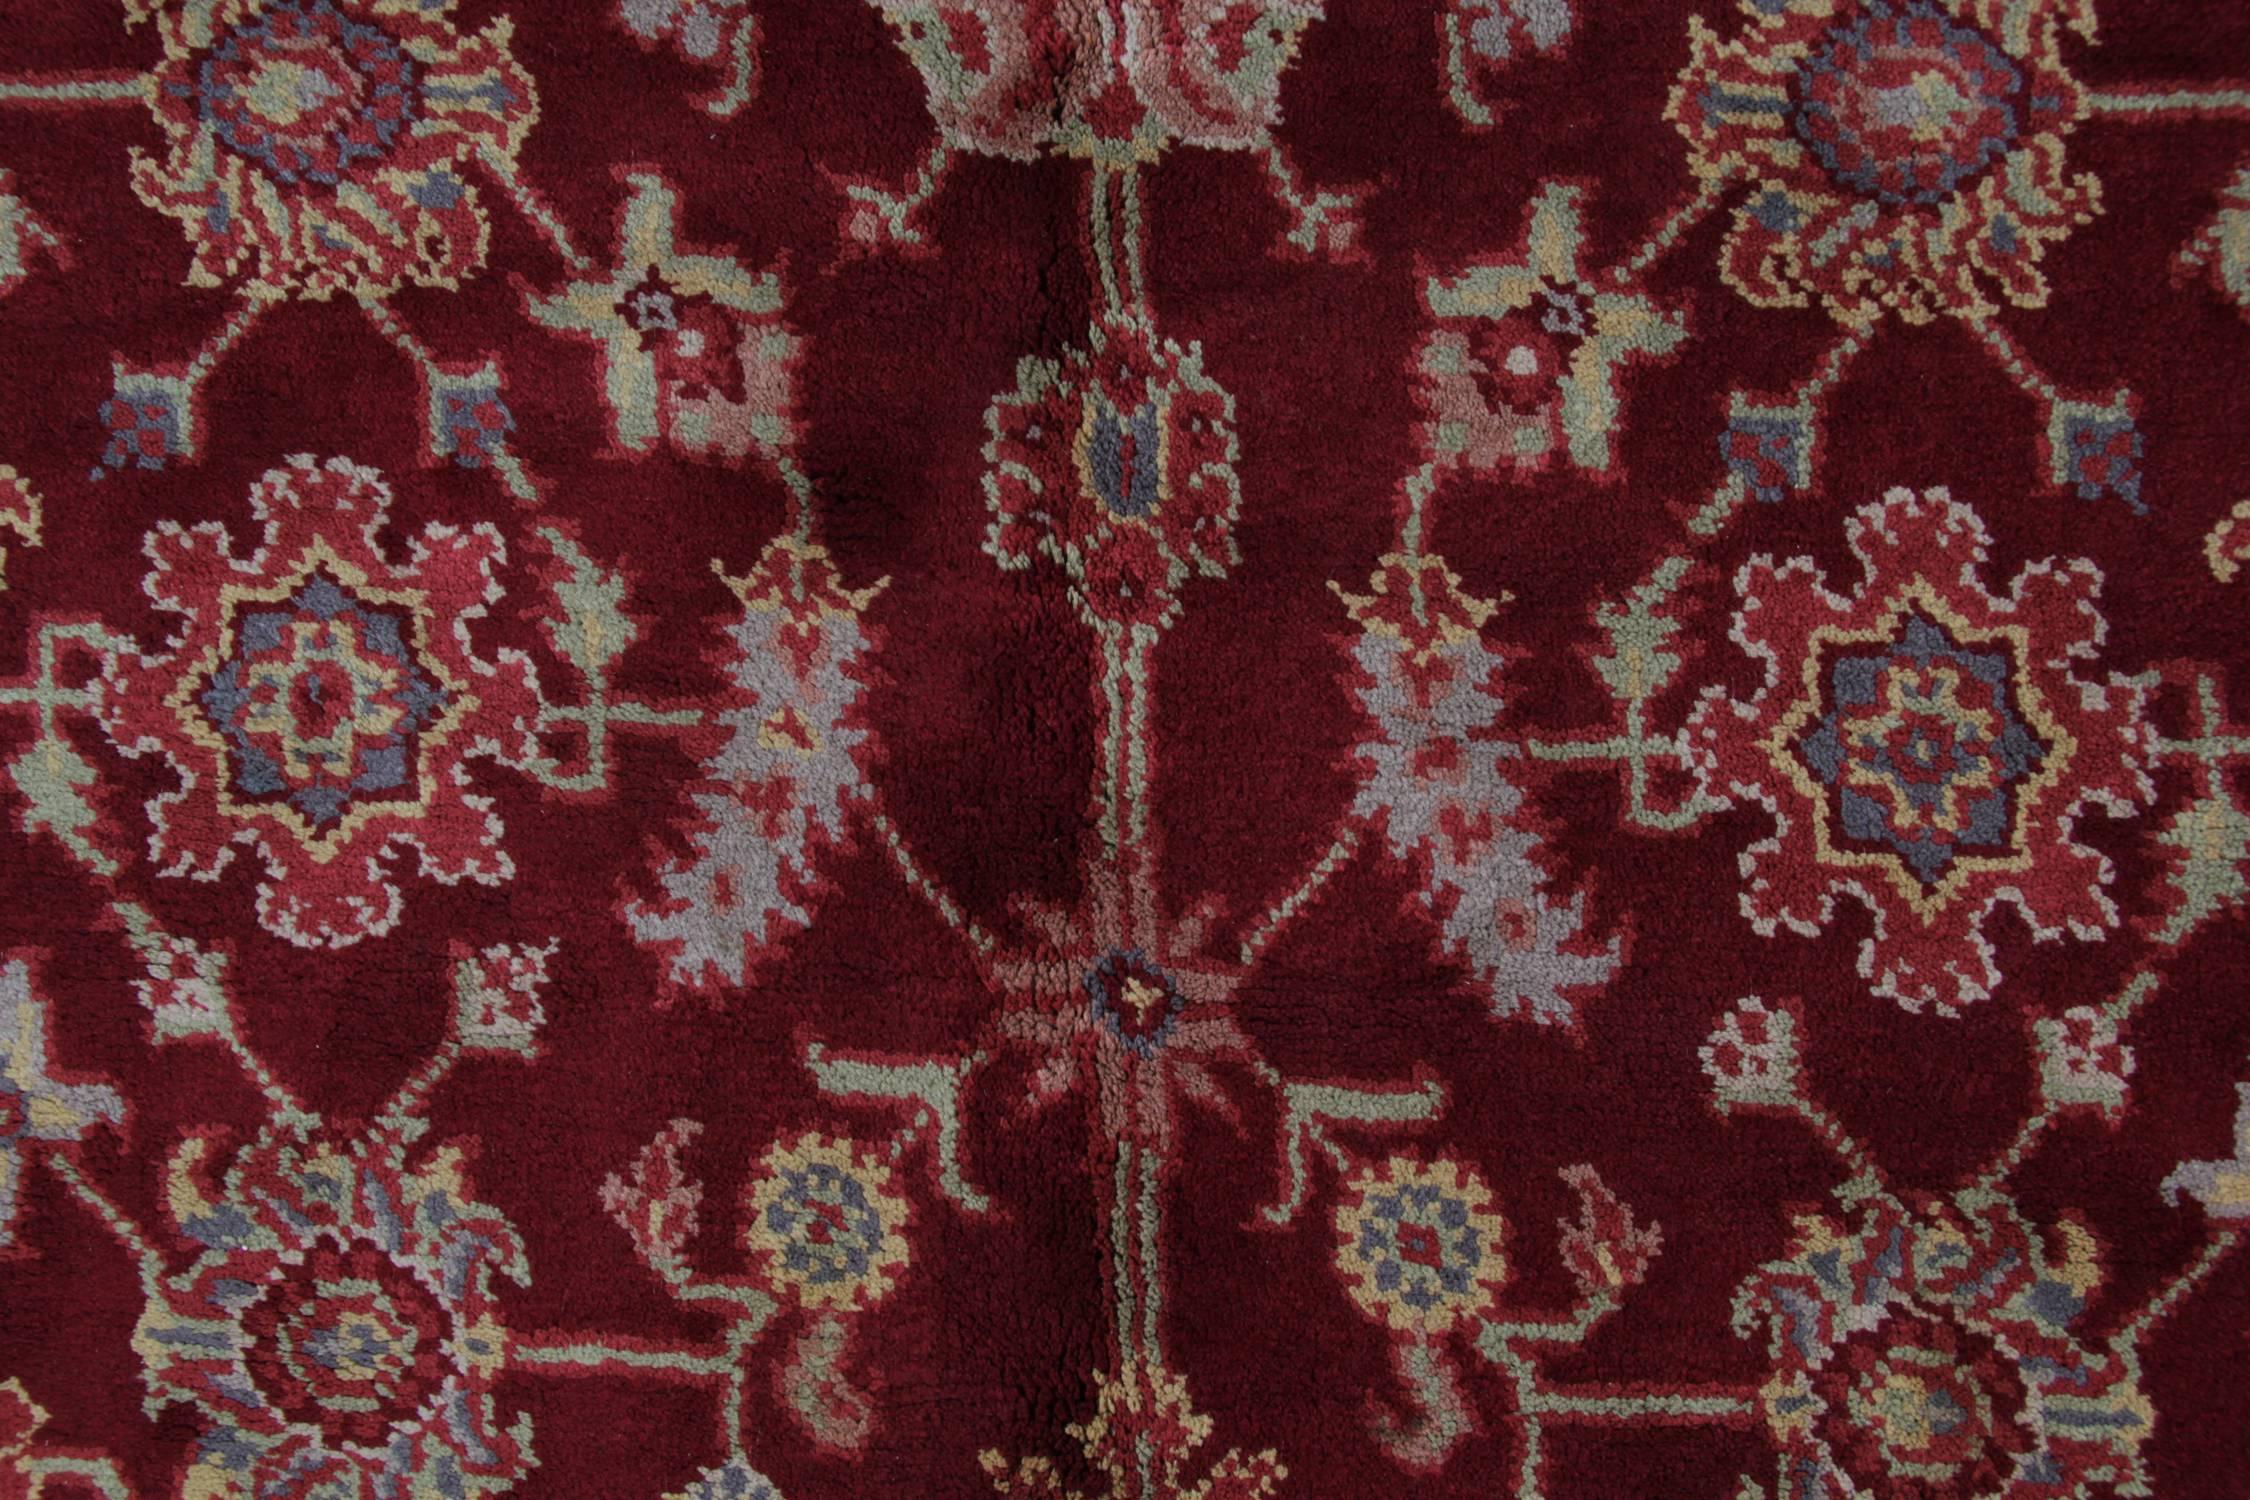 Late 19th Century Handmade Carpet Rare Antique Rugs, English Ax minster Art Deco Rug, Rug for Sale For Sale